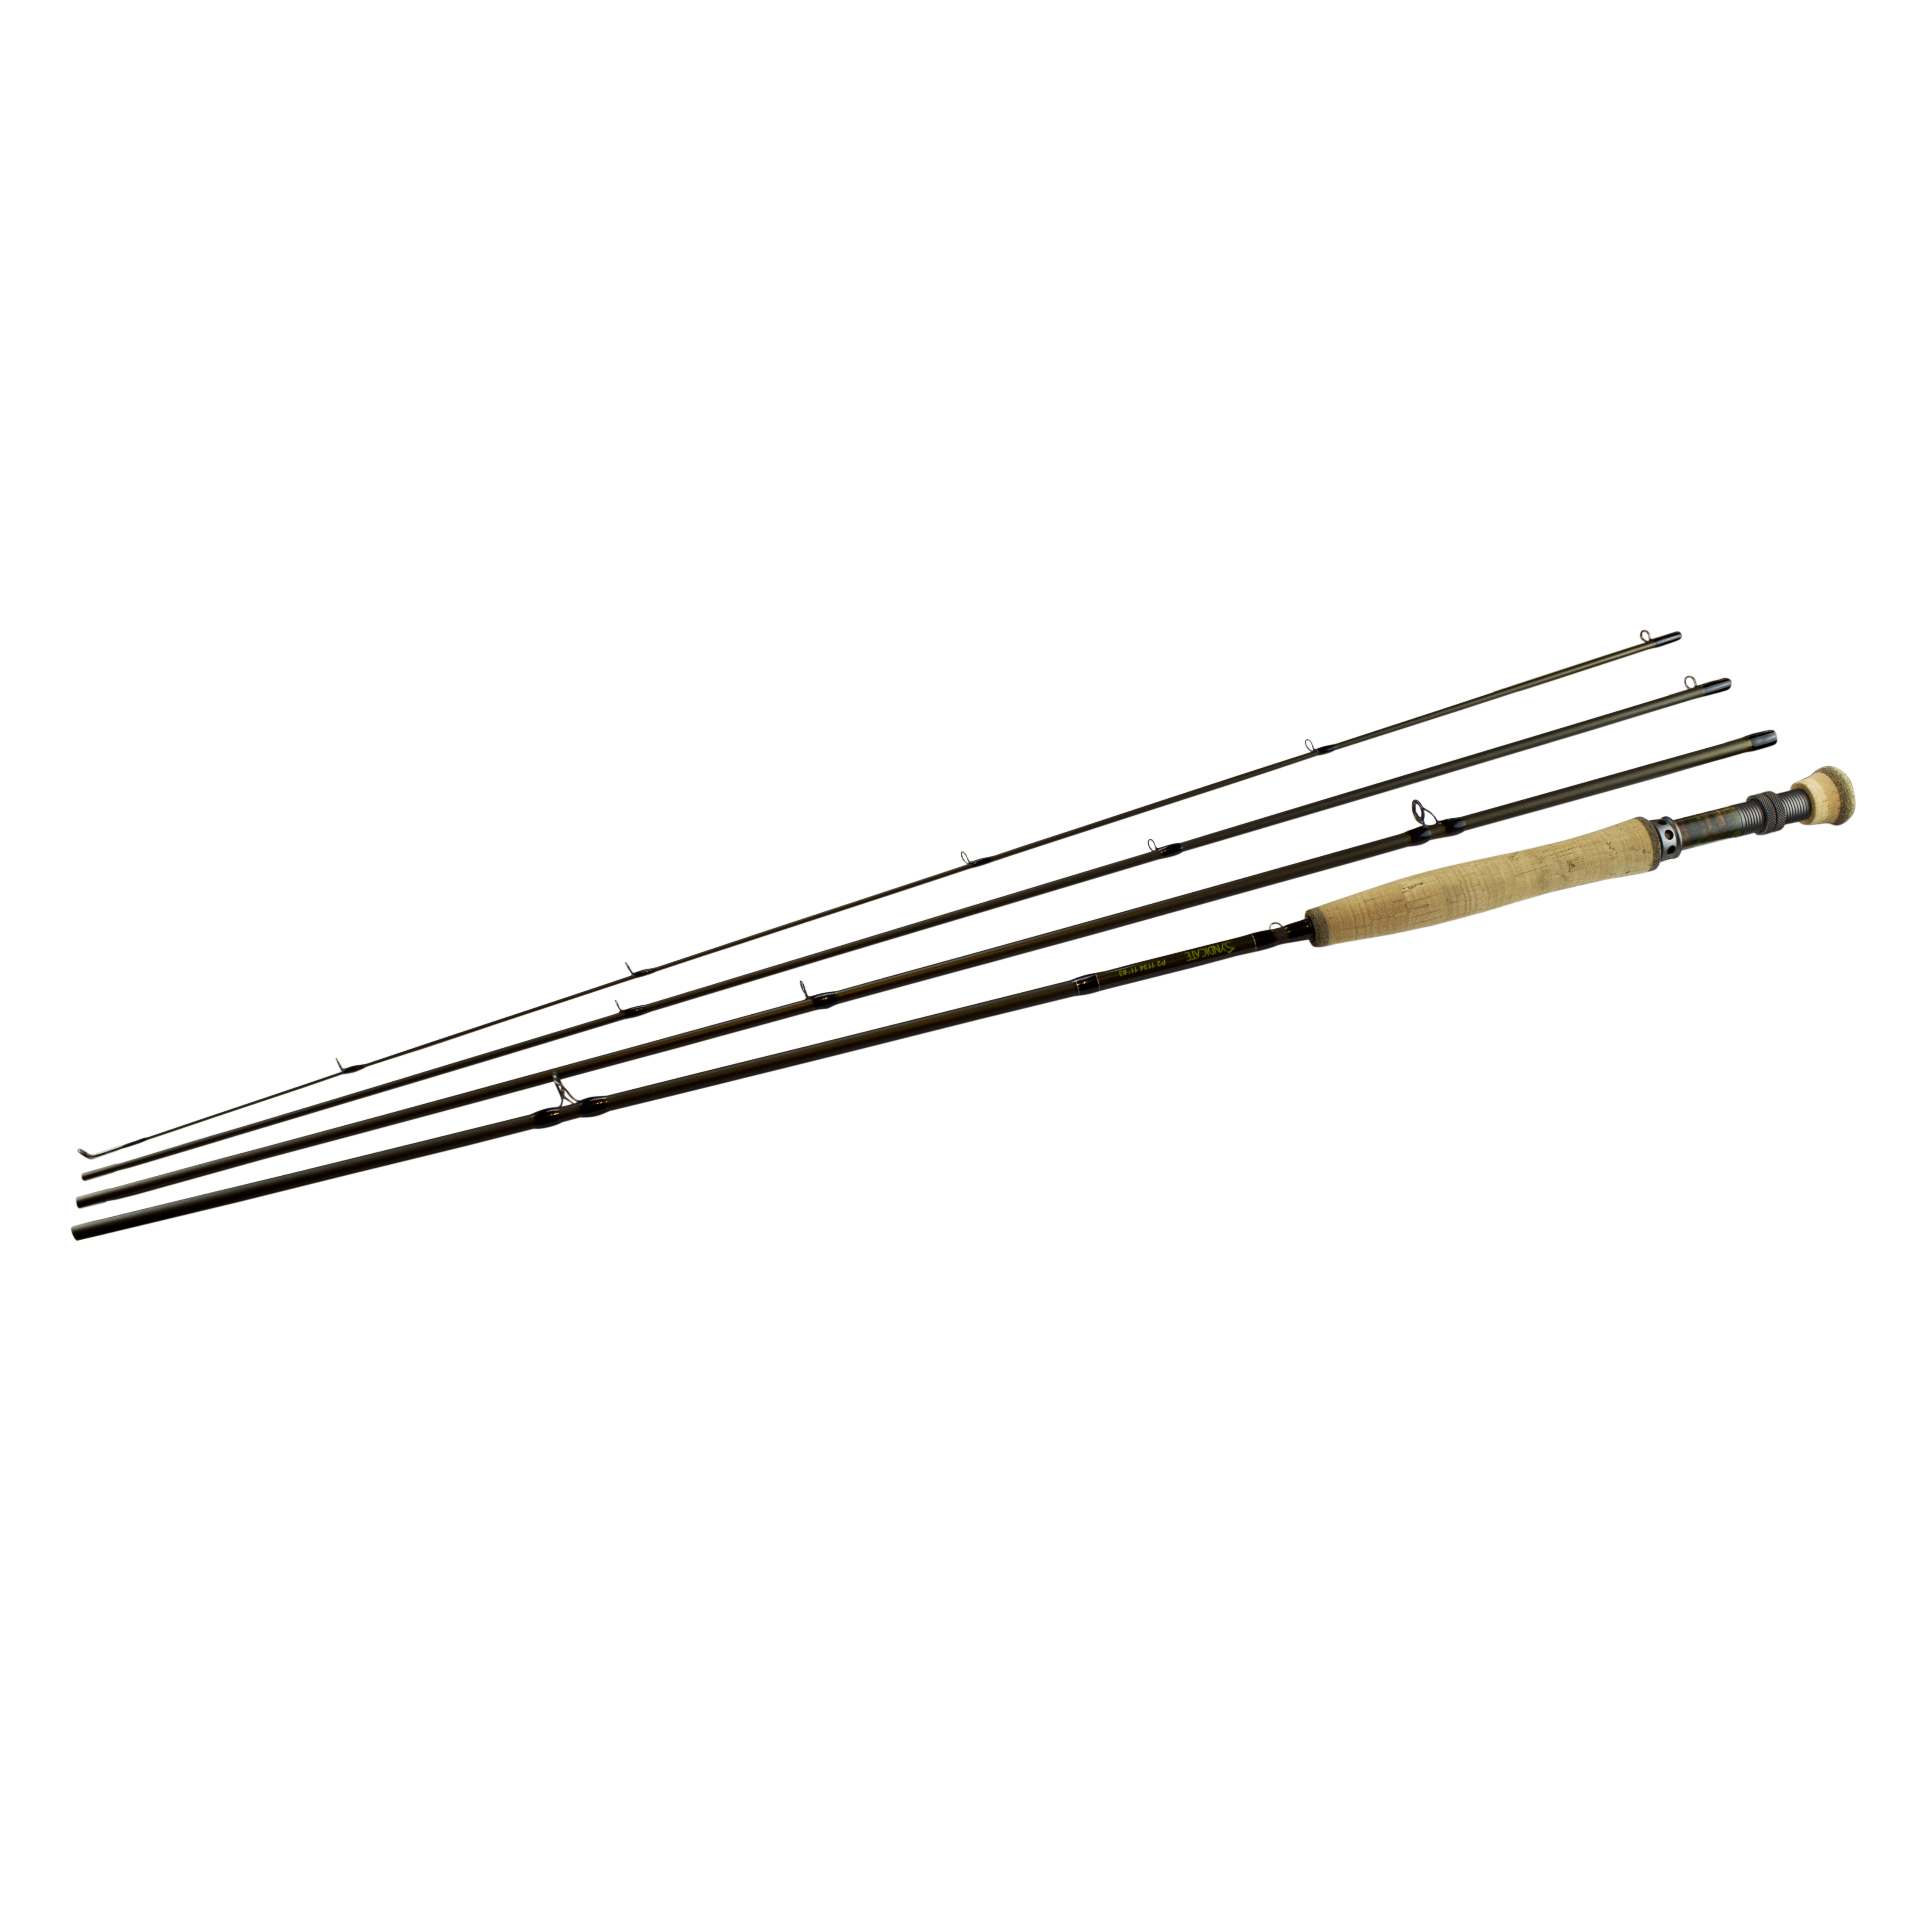 Syndicate P2 1134 11' 3wt Fly Rod